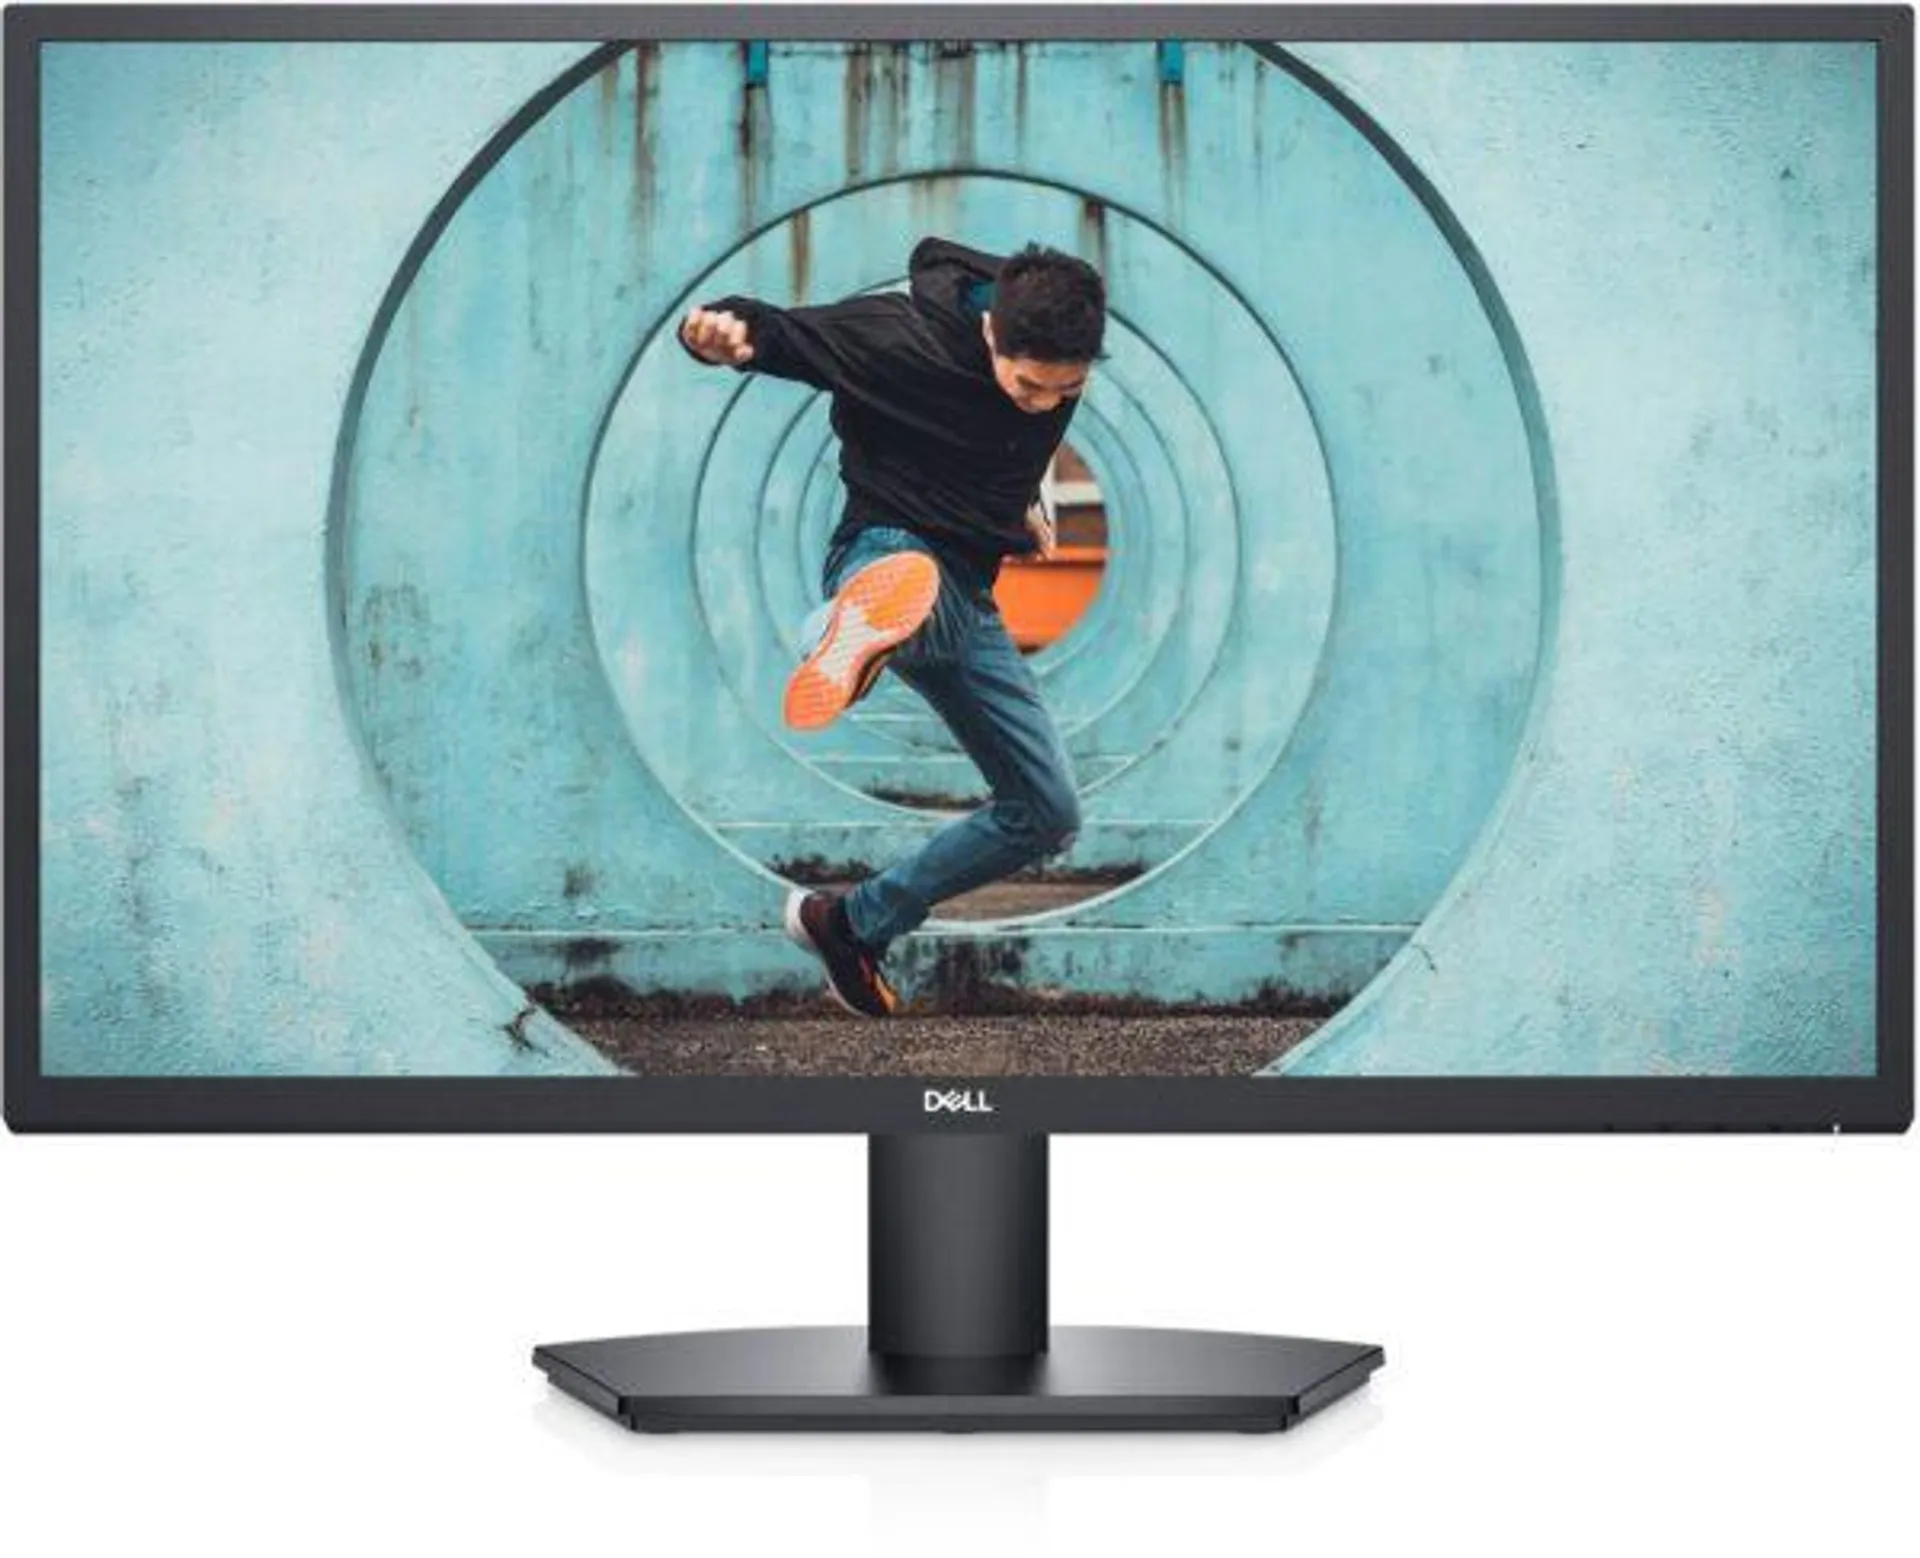 DELL SE2722H 27″ LED LCD MONITOR FHD